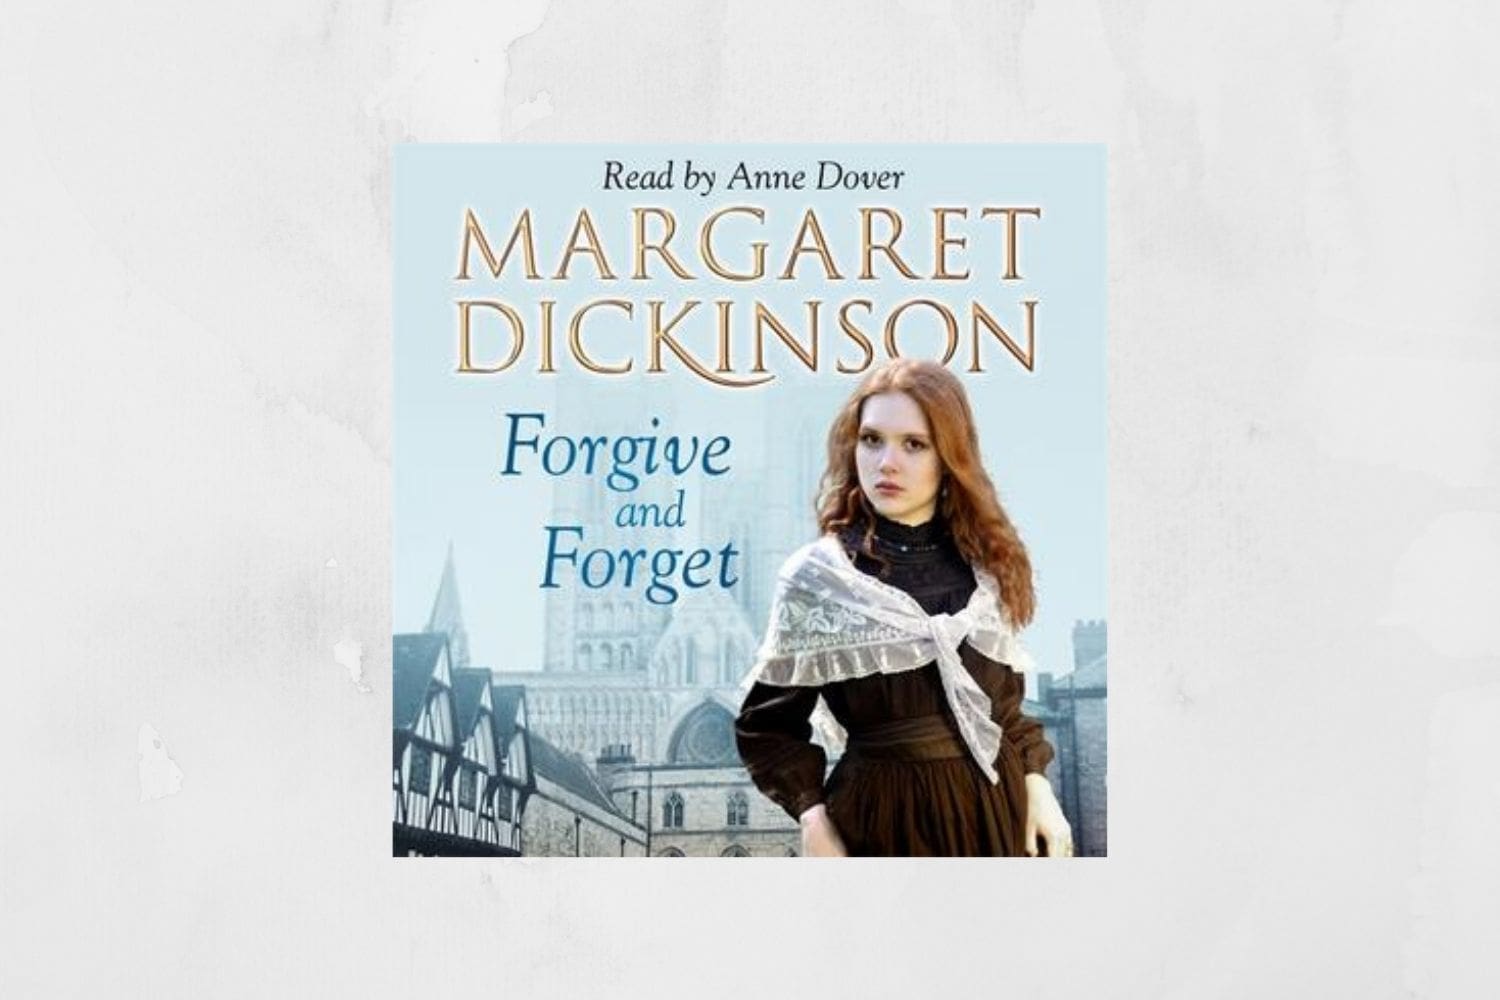 Forgive and Forget Audiobook cover by Margaret Dickinson